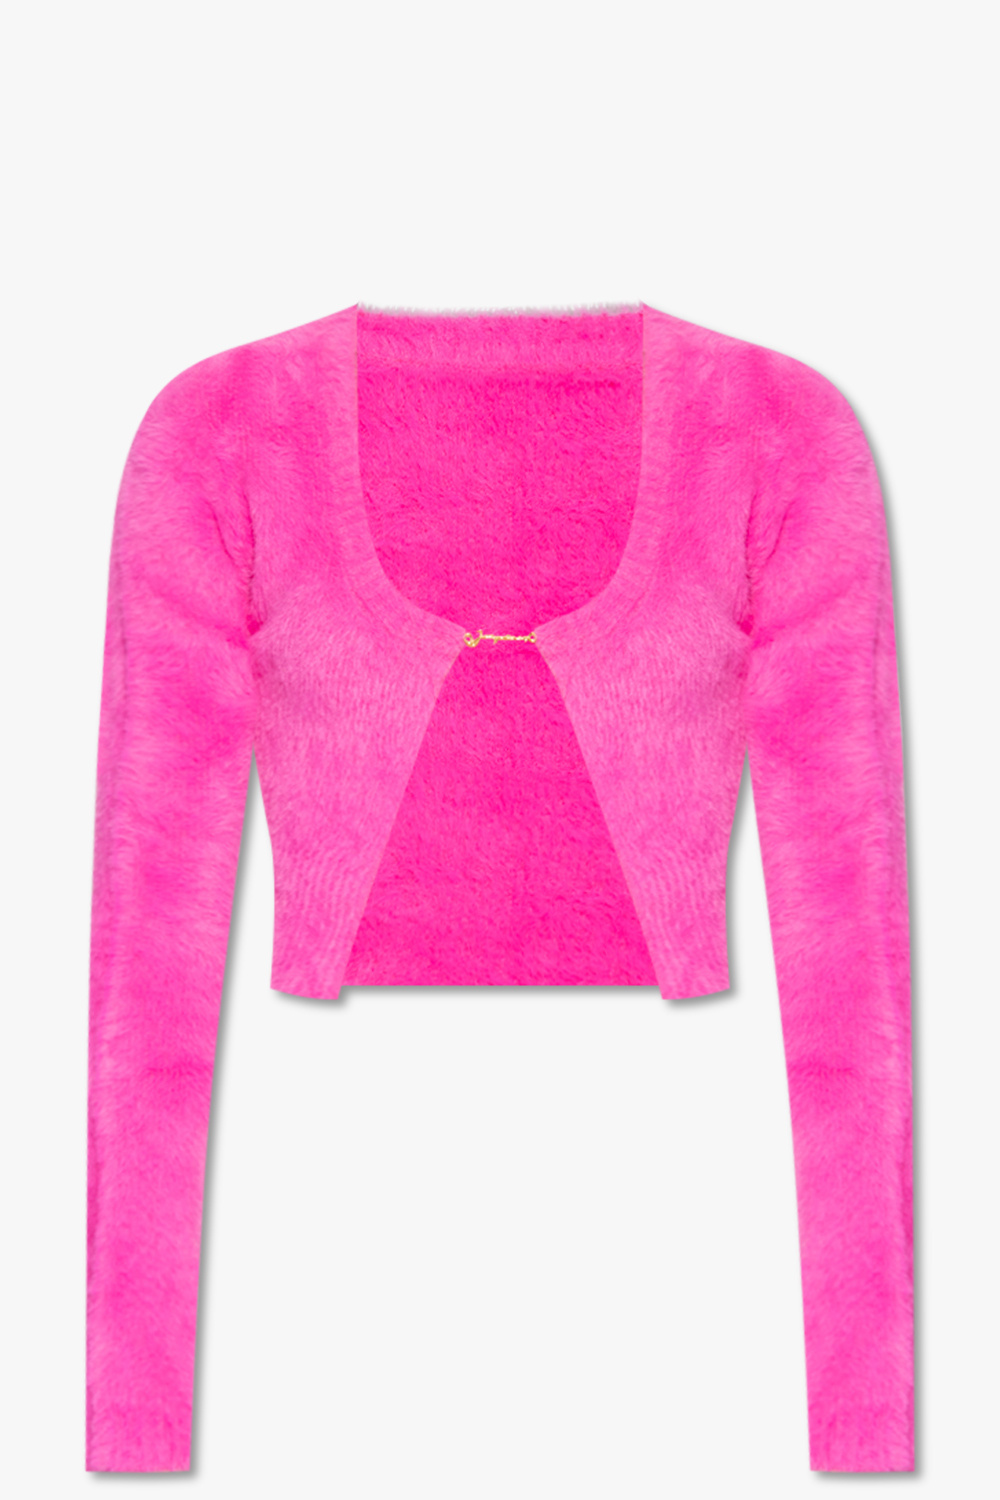 Jacquemus ‘Neve’ fluffy top